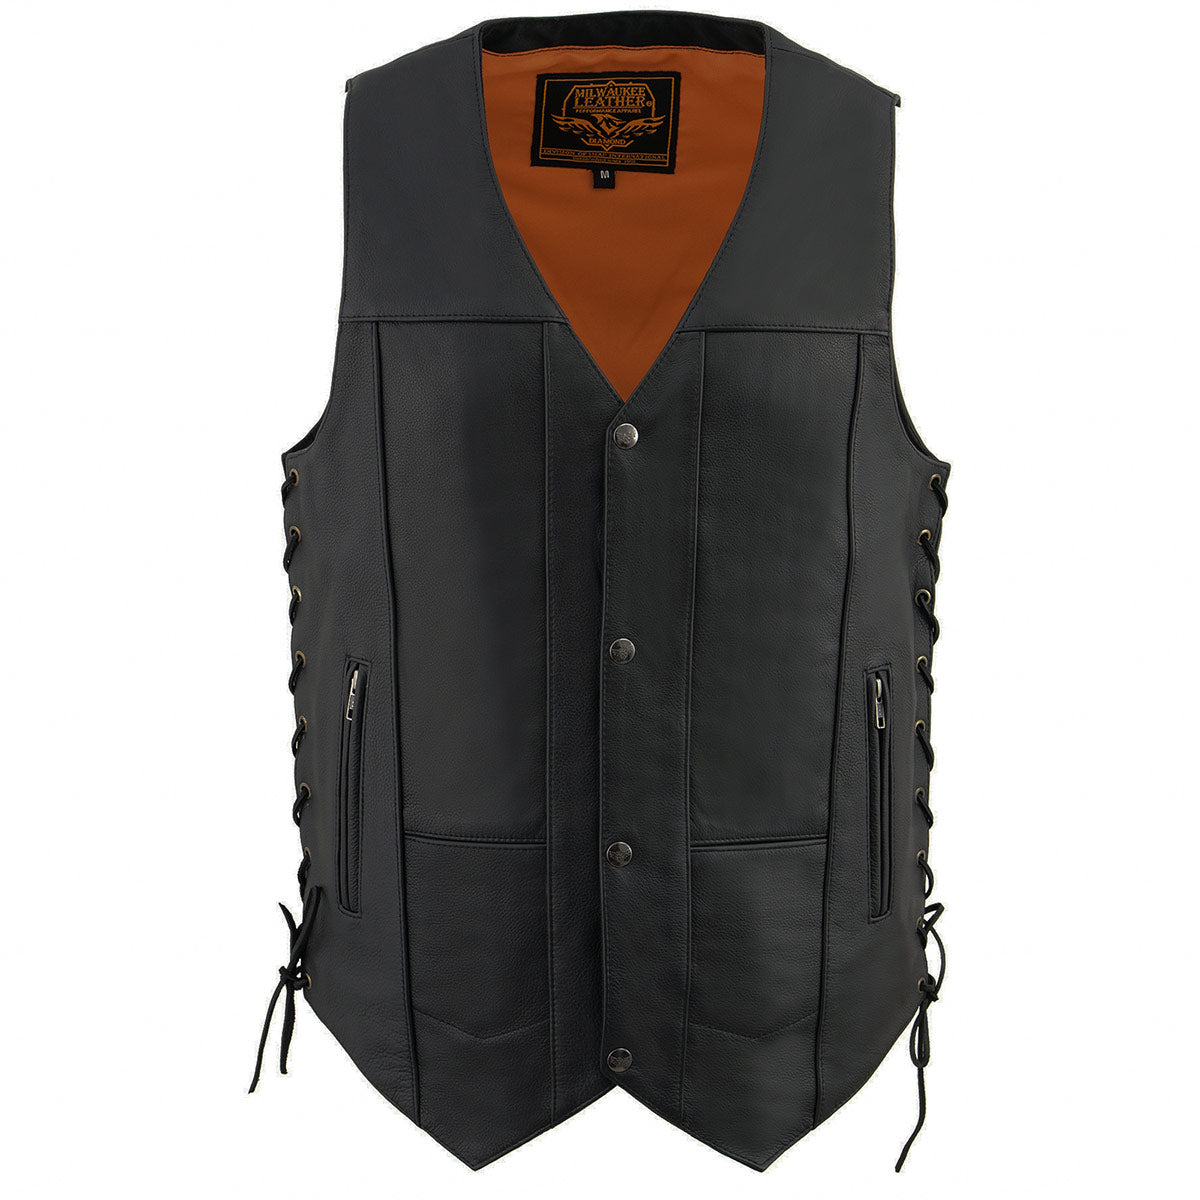 Milwaukee Leather MLM3541 Men's Roulette Black 10 Pocket Motorcycle Leather Vest w/ Cool-Tec